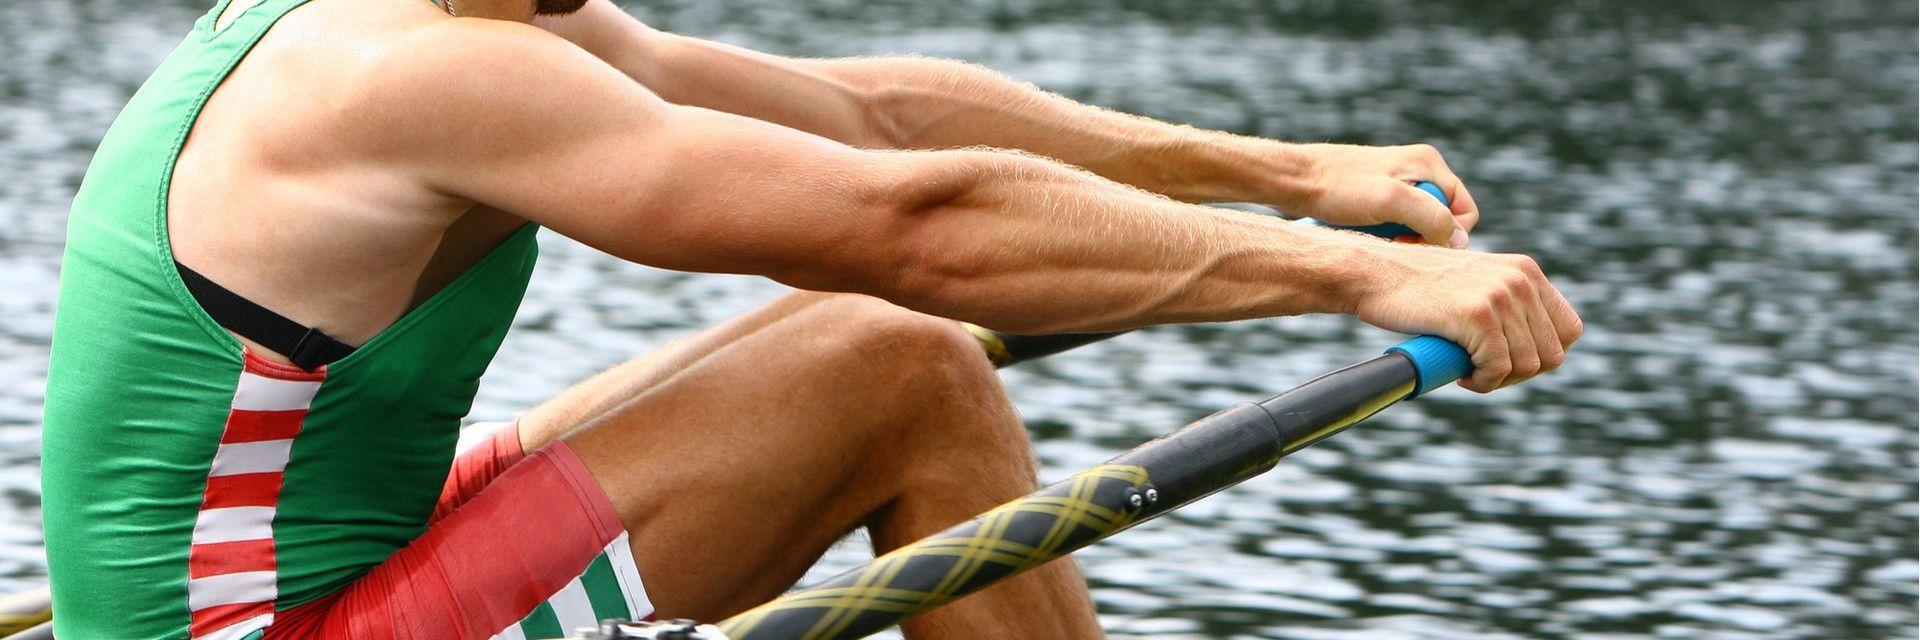 Three Rib Stress Fracture Symptoms from Rowing | Rothman Orthopaedic  Institute